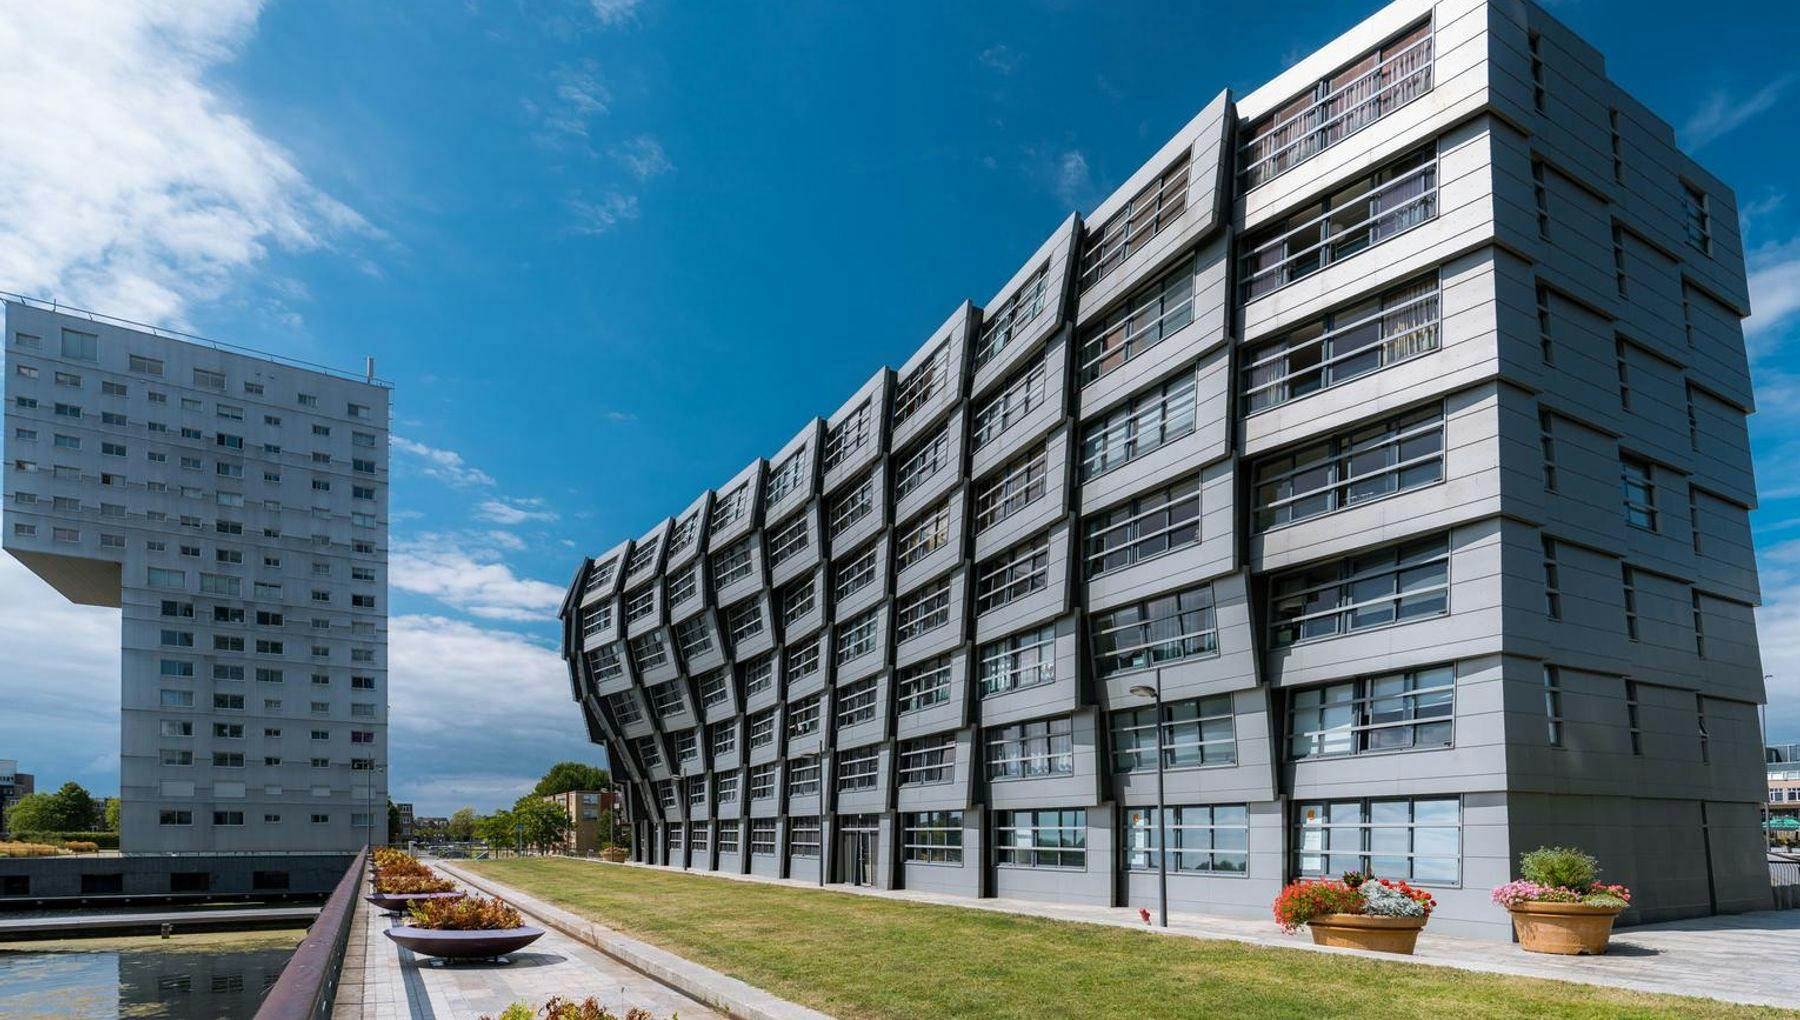 This modern flat building in Almere with living spaces is called The Wave.